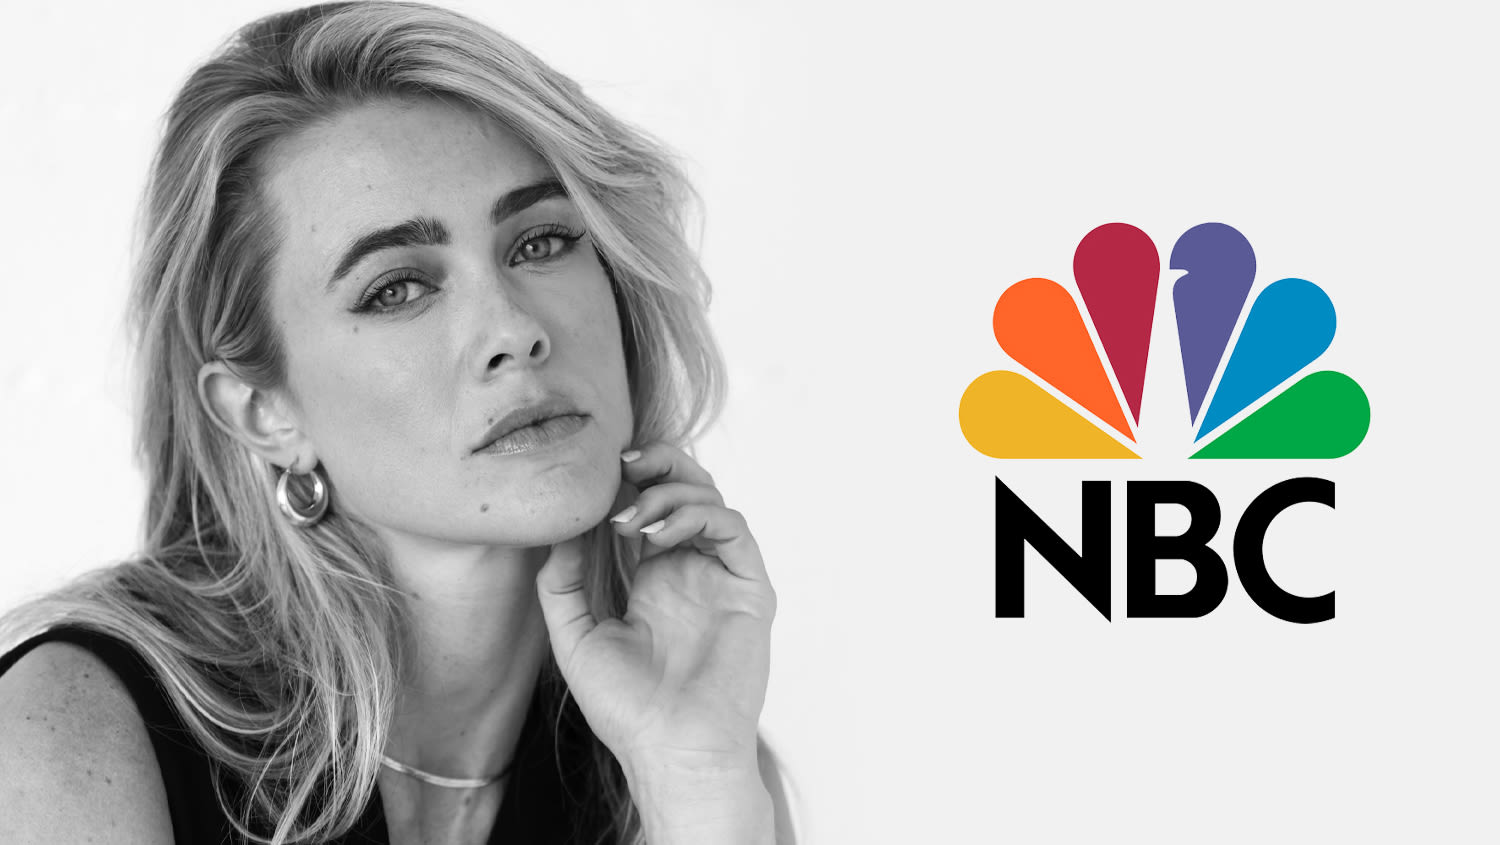 Melissa Roxburgh To Star In NBC Series ‘The Hunting Party’